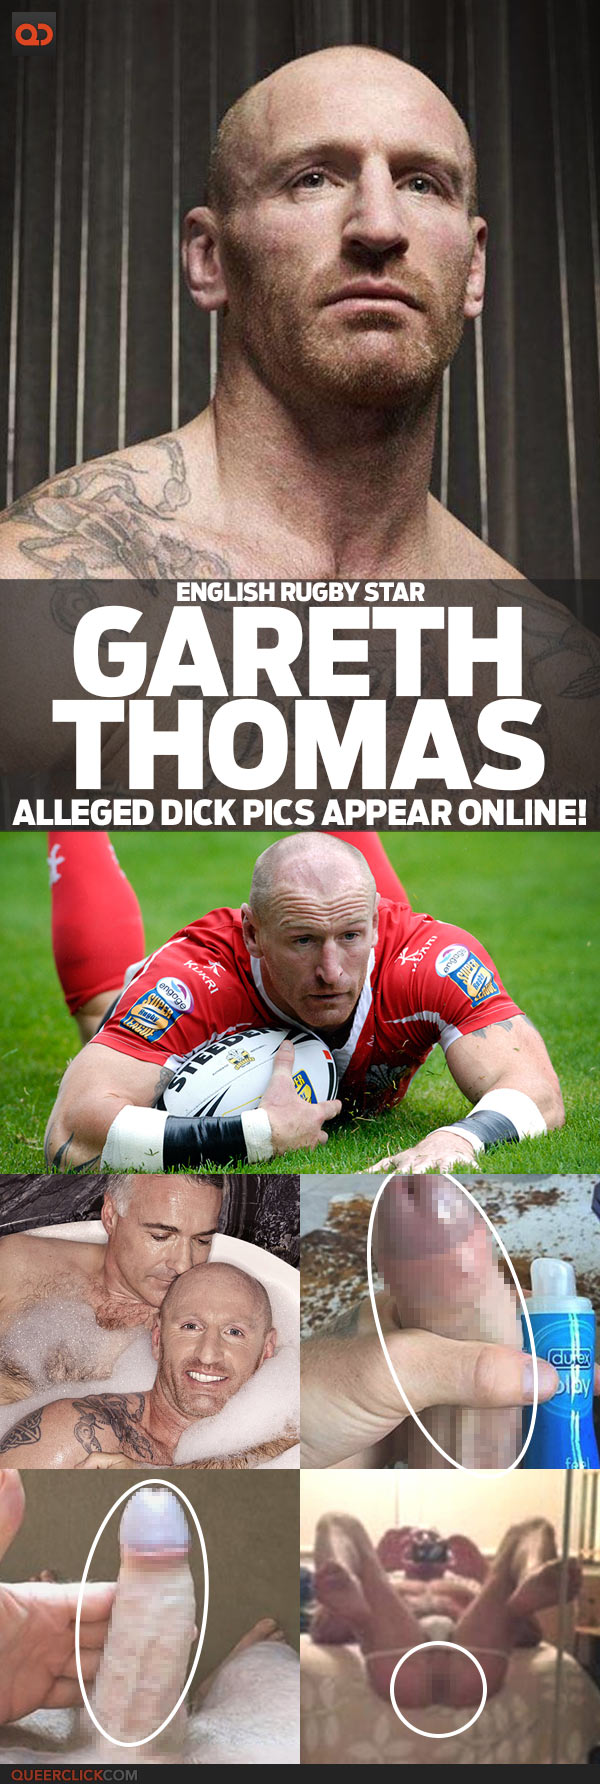 Gareth Thomas, English Rugby Star, Alleged Dick Pics Appear Online! picture